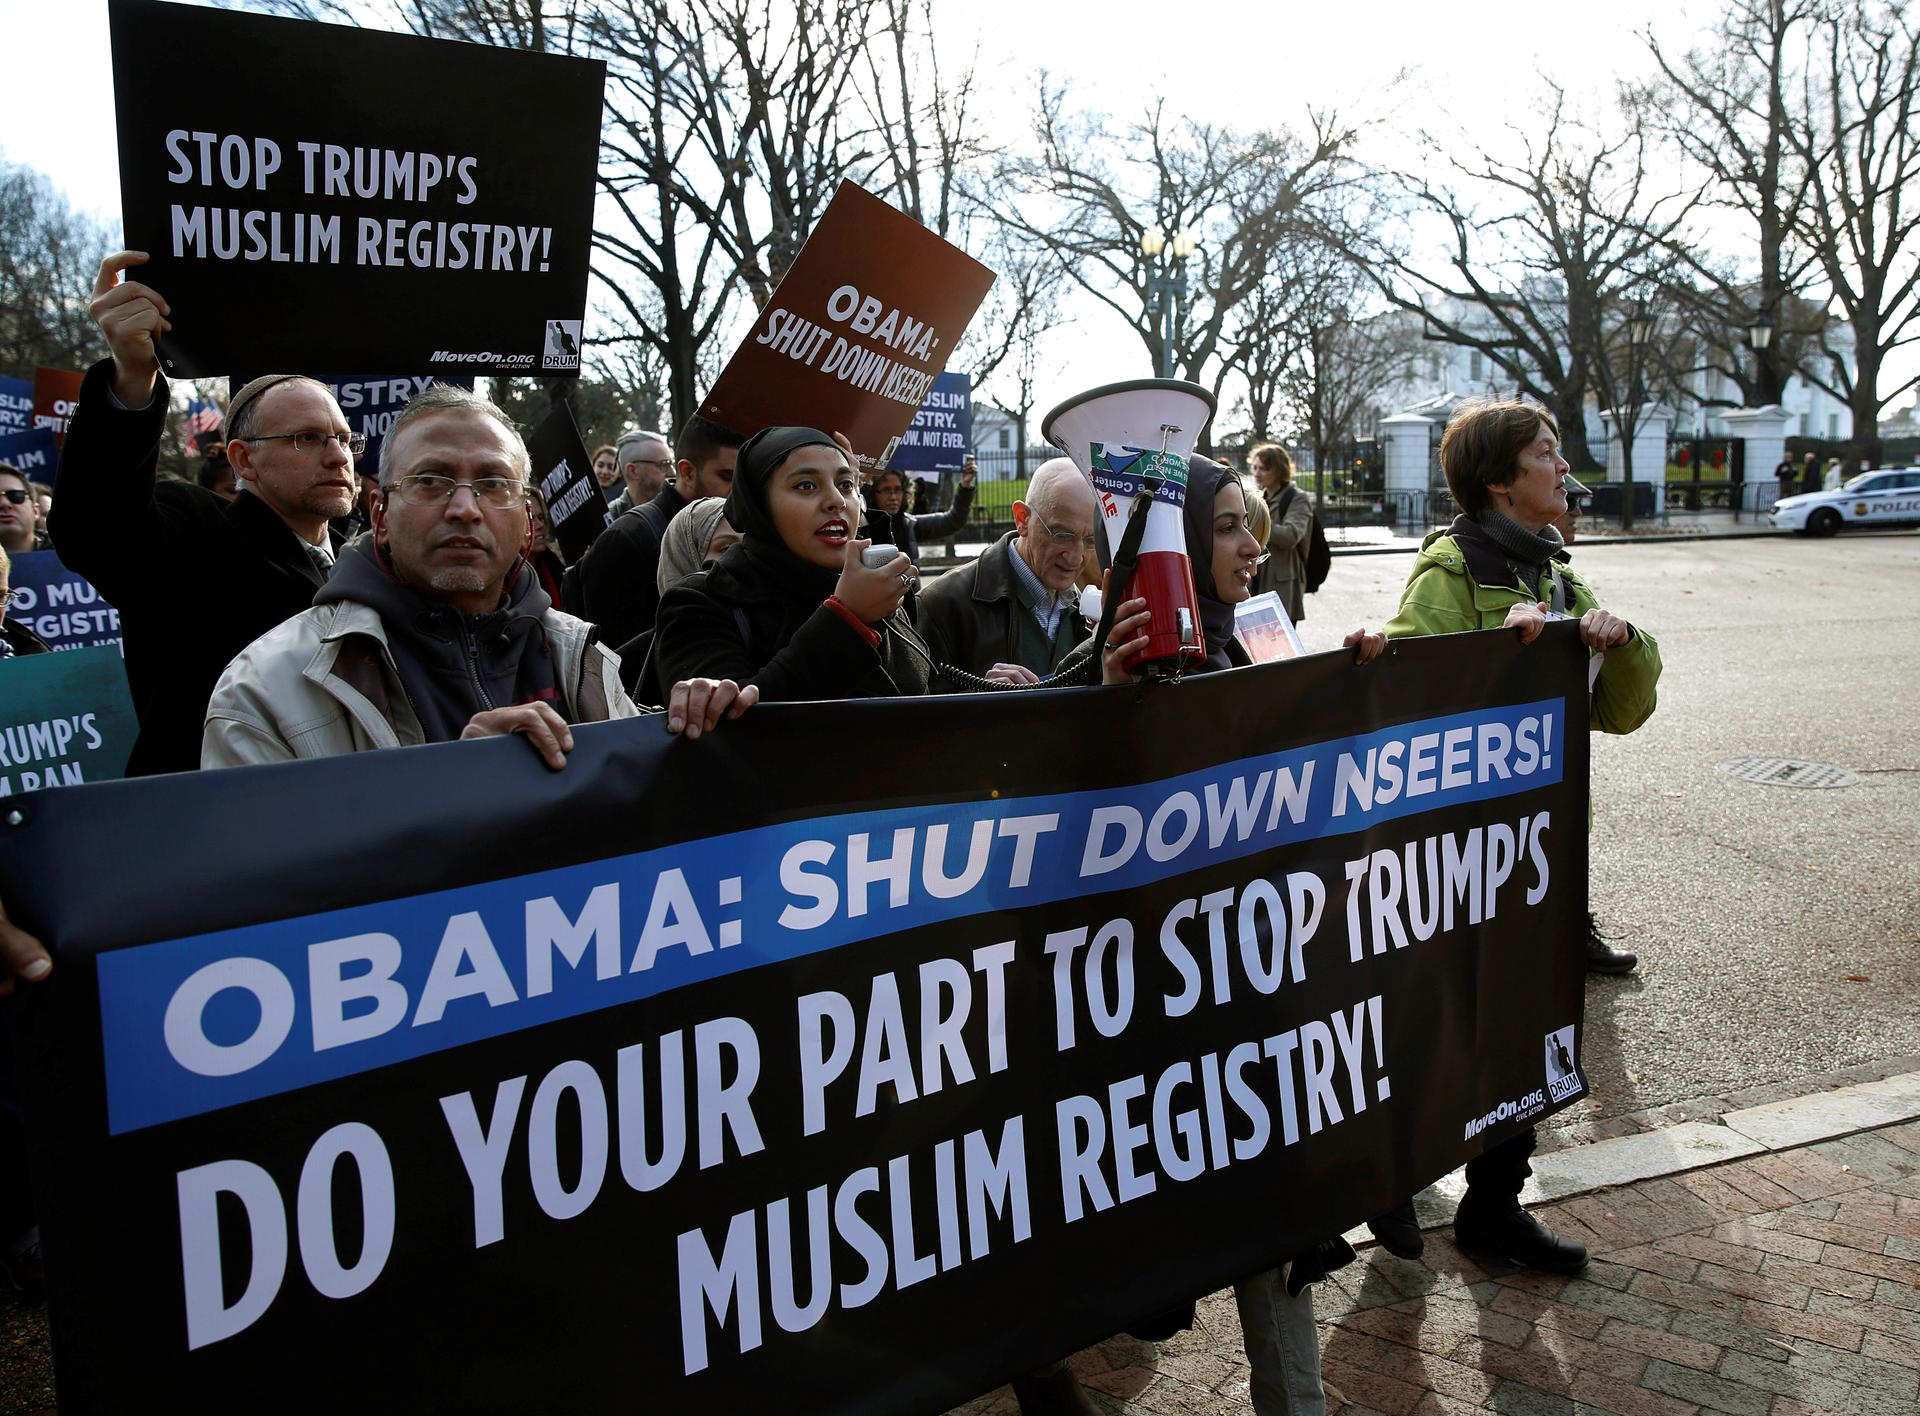 Protesters march with a sign that says "Obama: Shut down NSEERS"